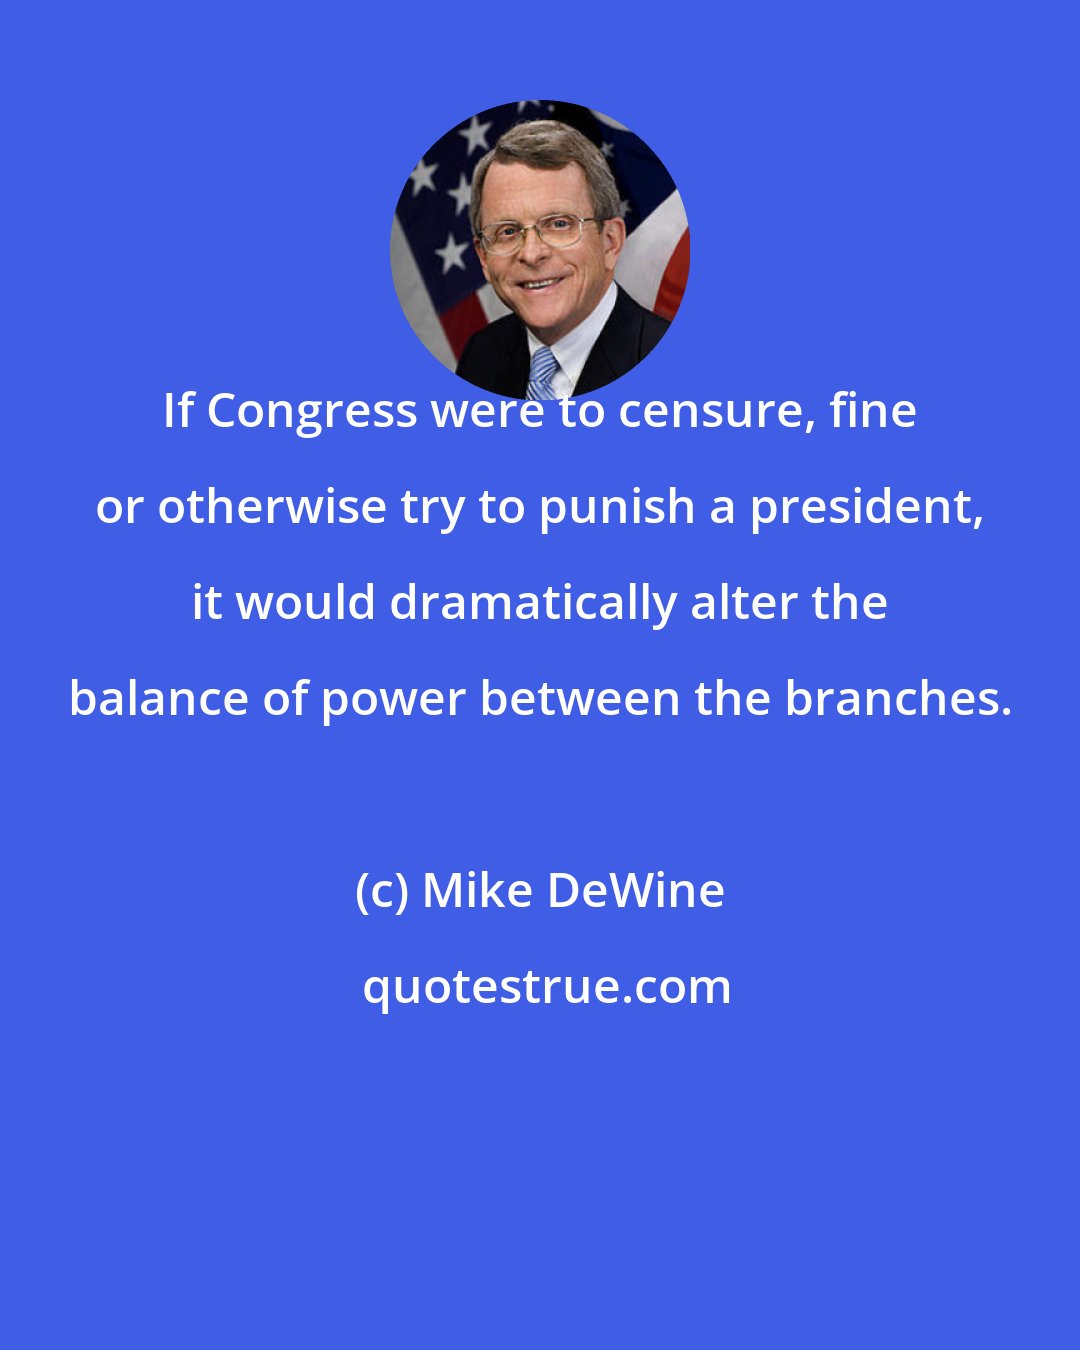 Mike DeWine: If Congress were to censure, fine or otherwise try to punish a president, it would dramatically alter the balance of power between the branches.